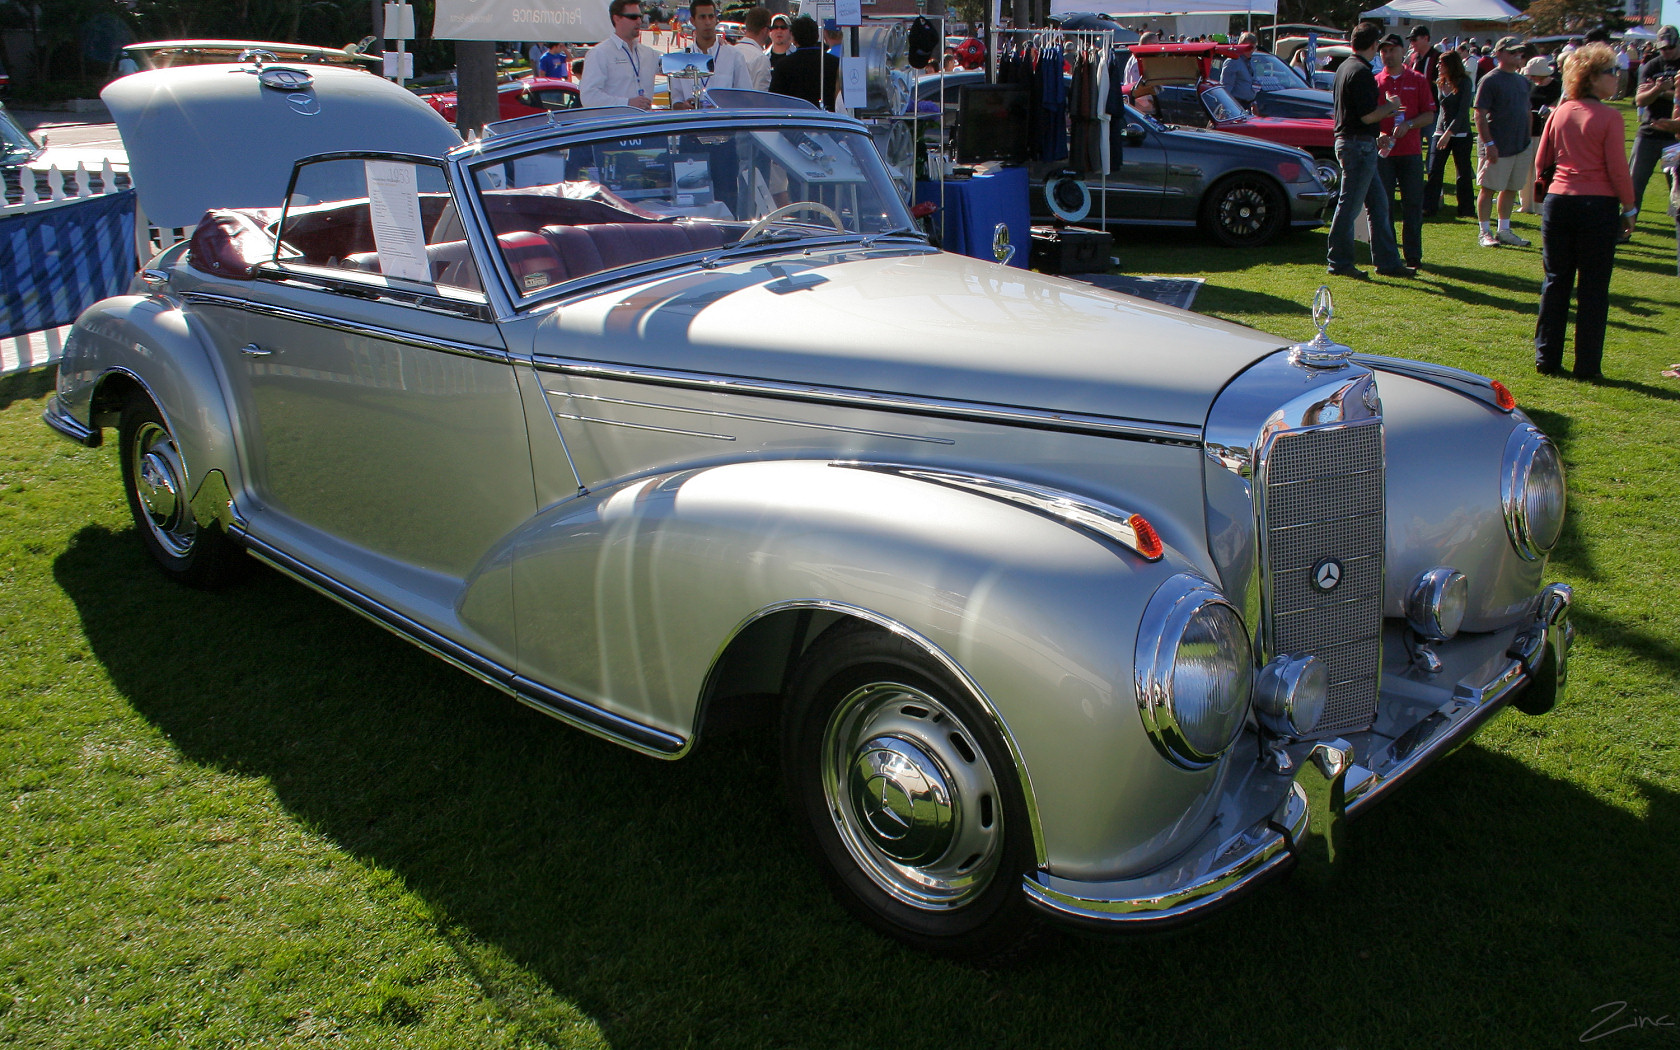 a vintage car on display at an automobile show